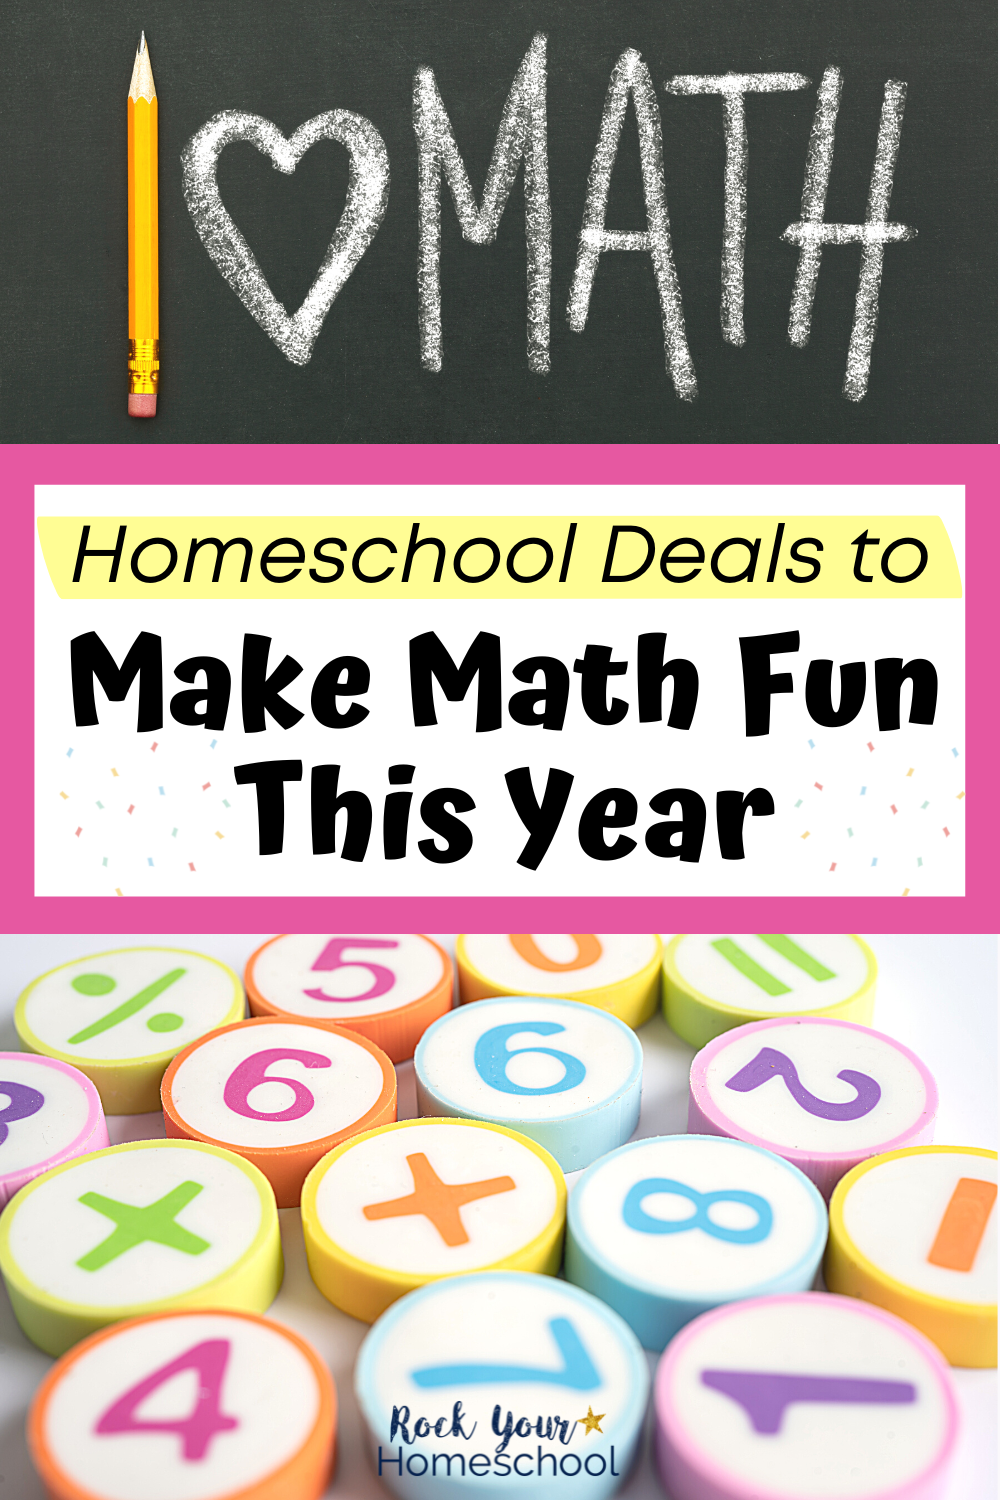 Summer Homeschool Deals to Make Math Fun This Year for Your Kids (and You)